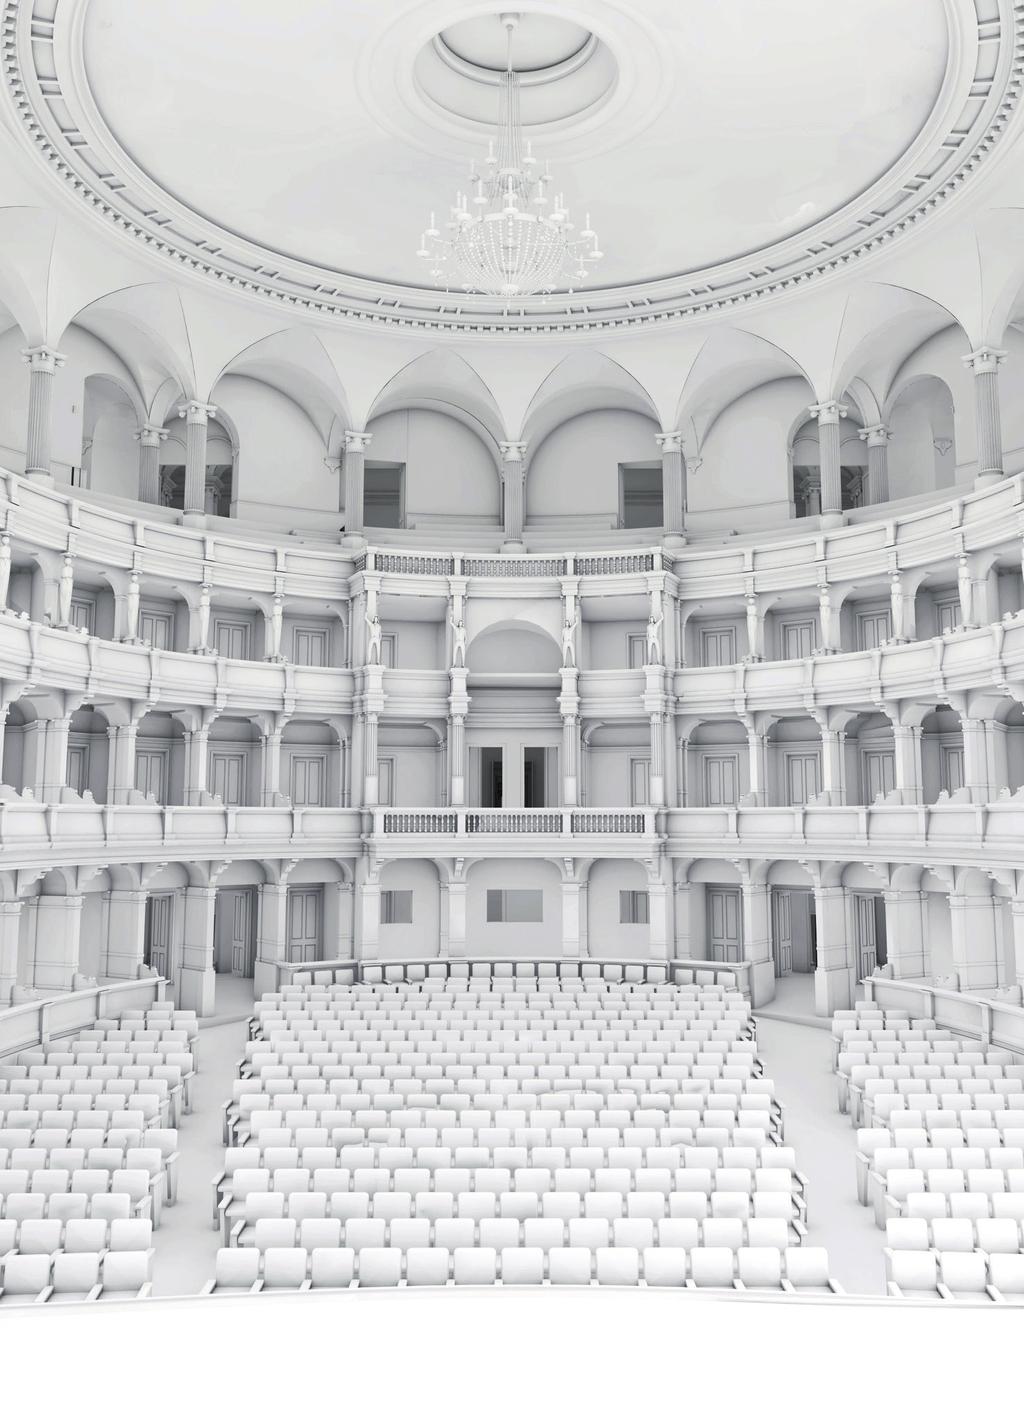 A 130 Year- Old Story The Architectural Survey of the Hungarian State Opera CÉH Inc.